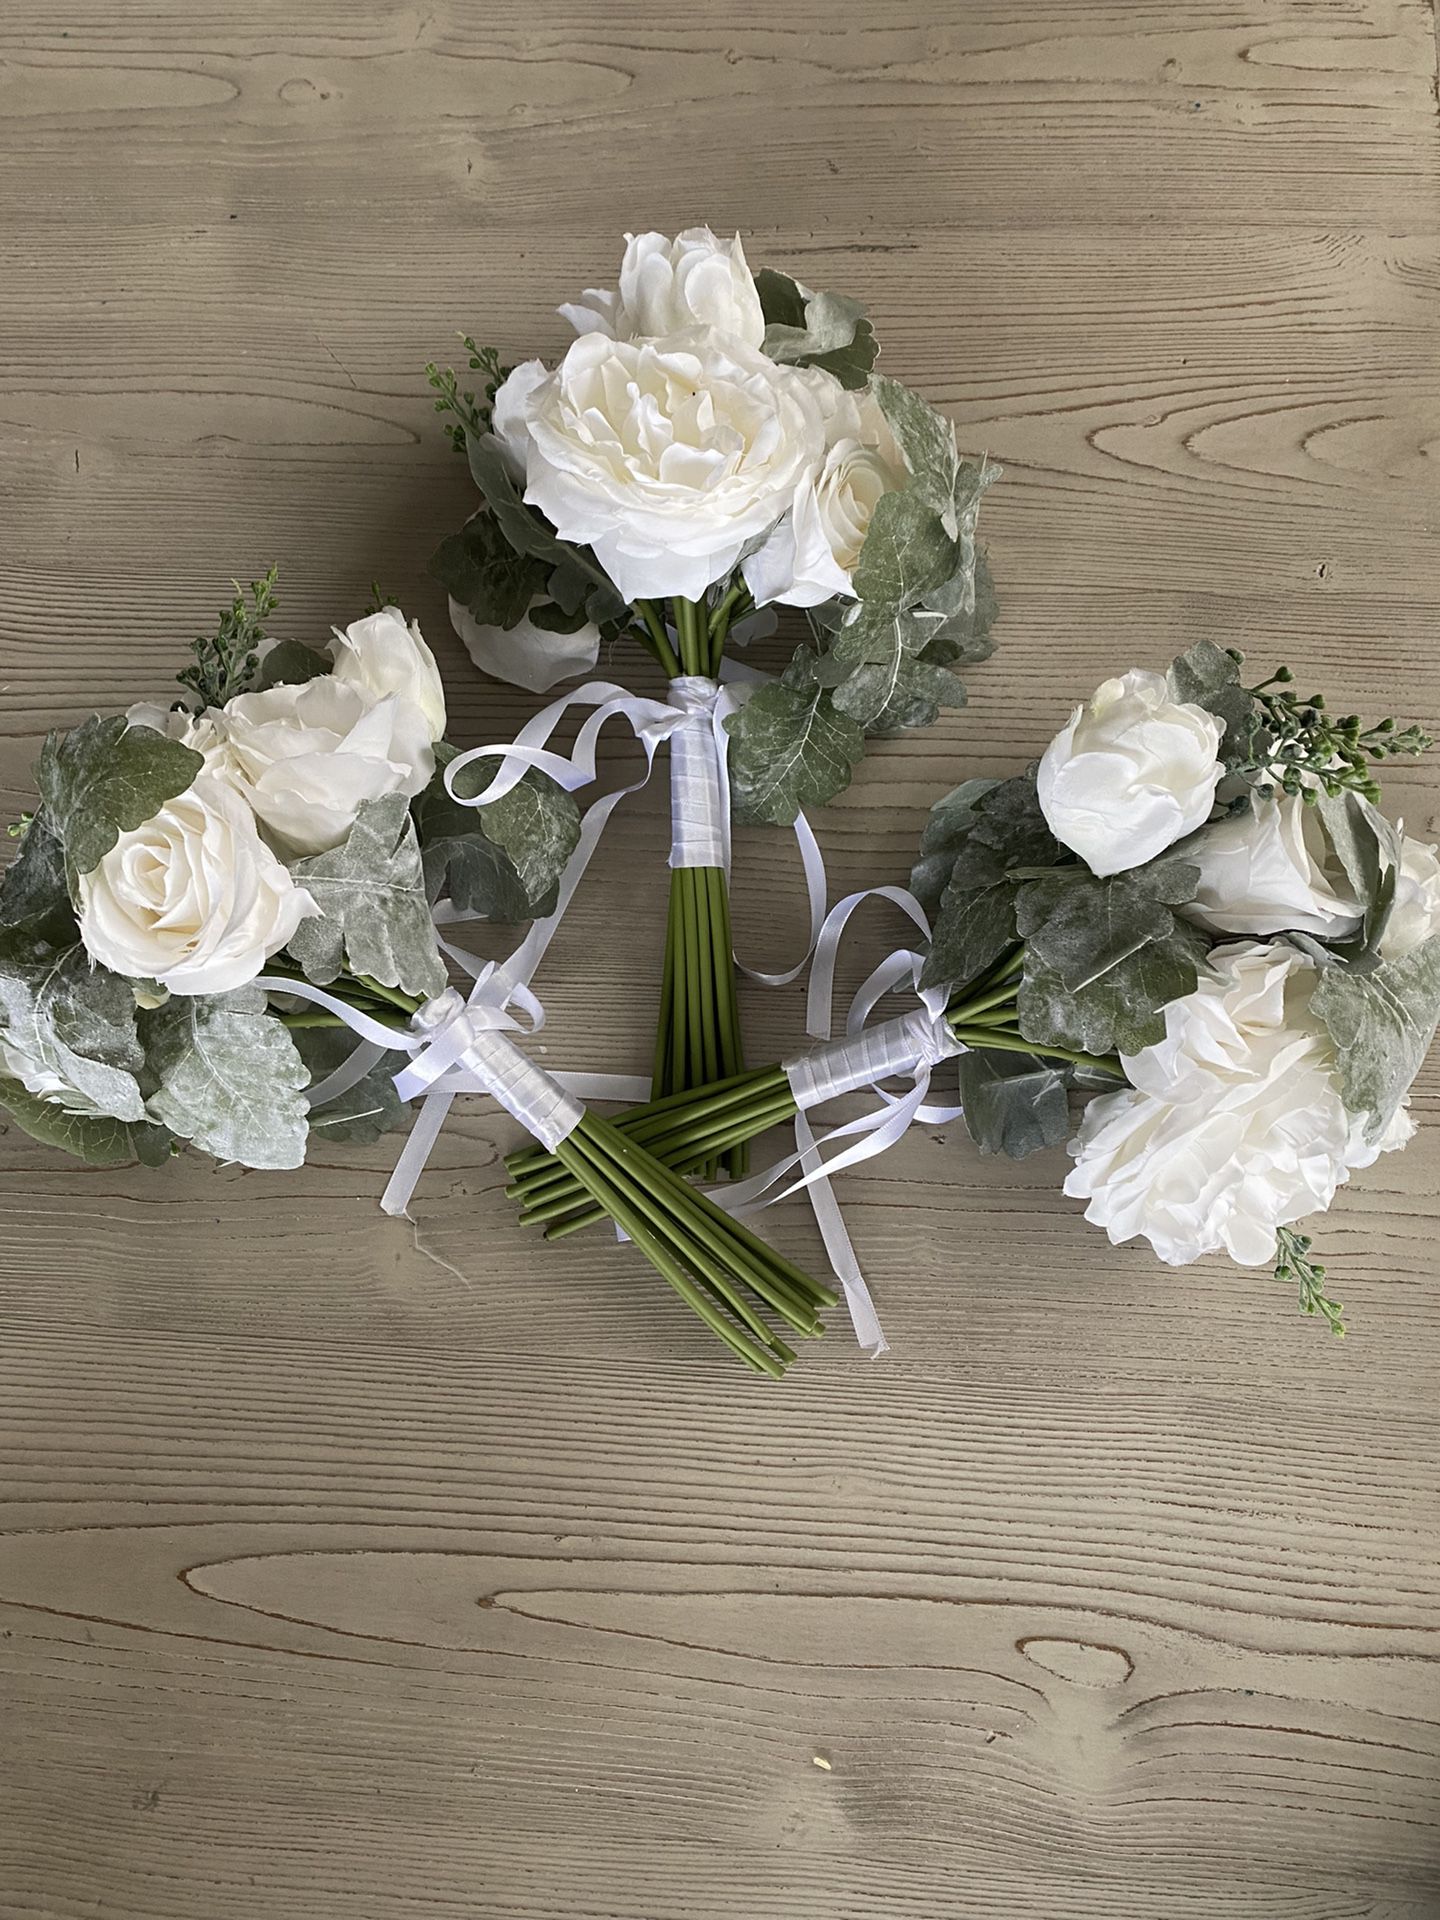 3 White Roses Bouquets